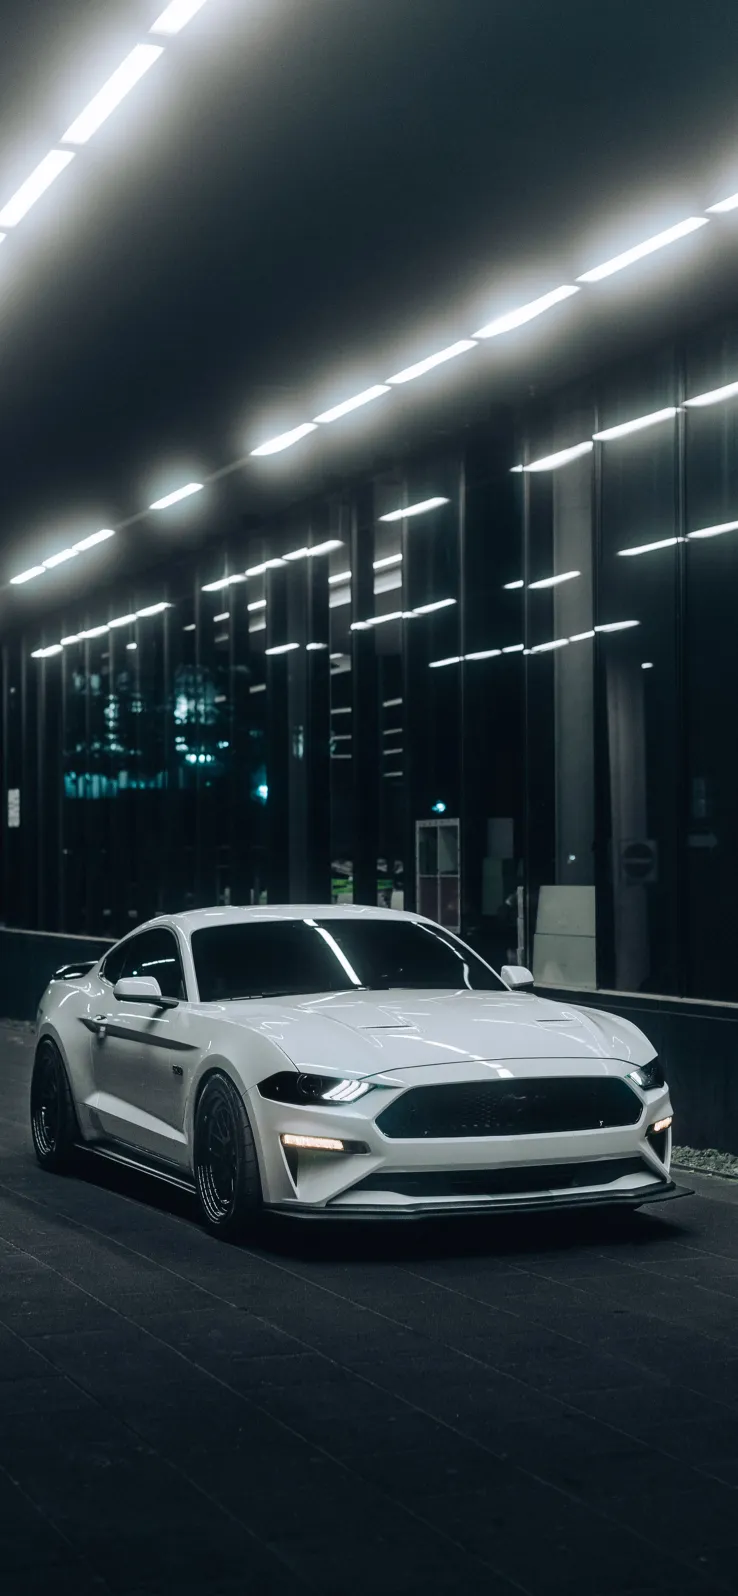 thumb for White Ford Mustang Wallpaper